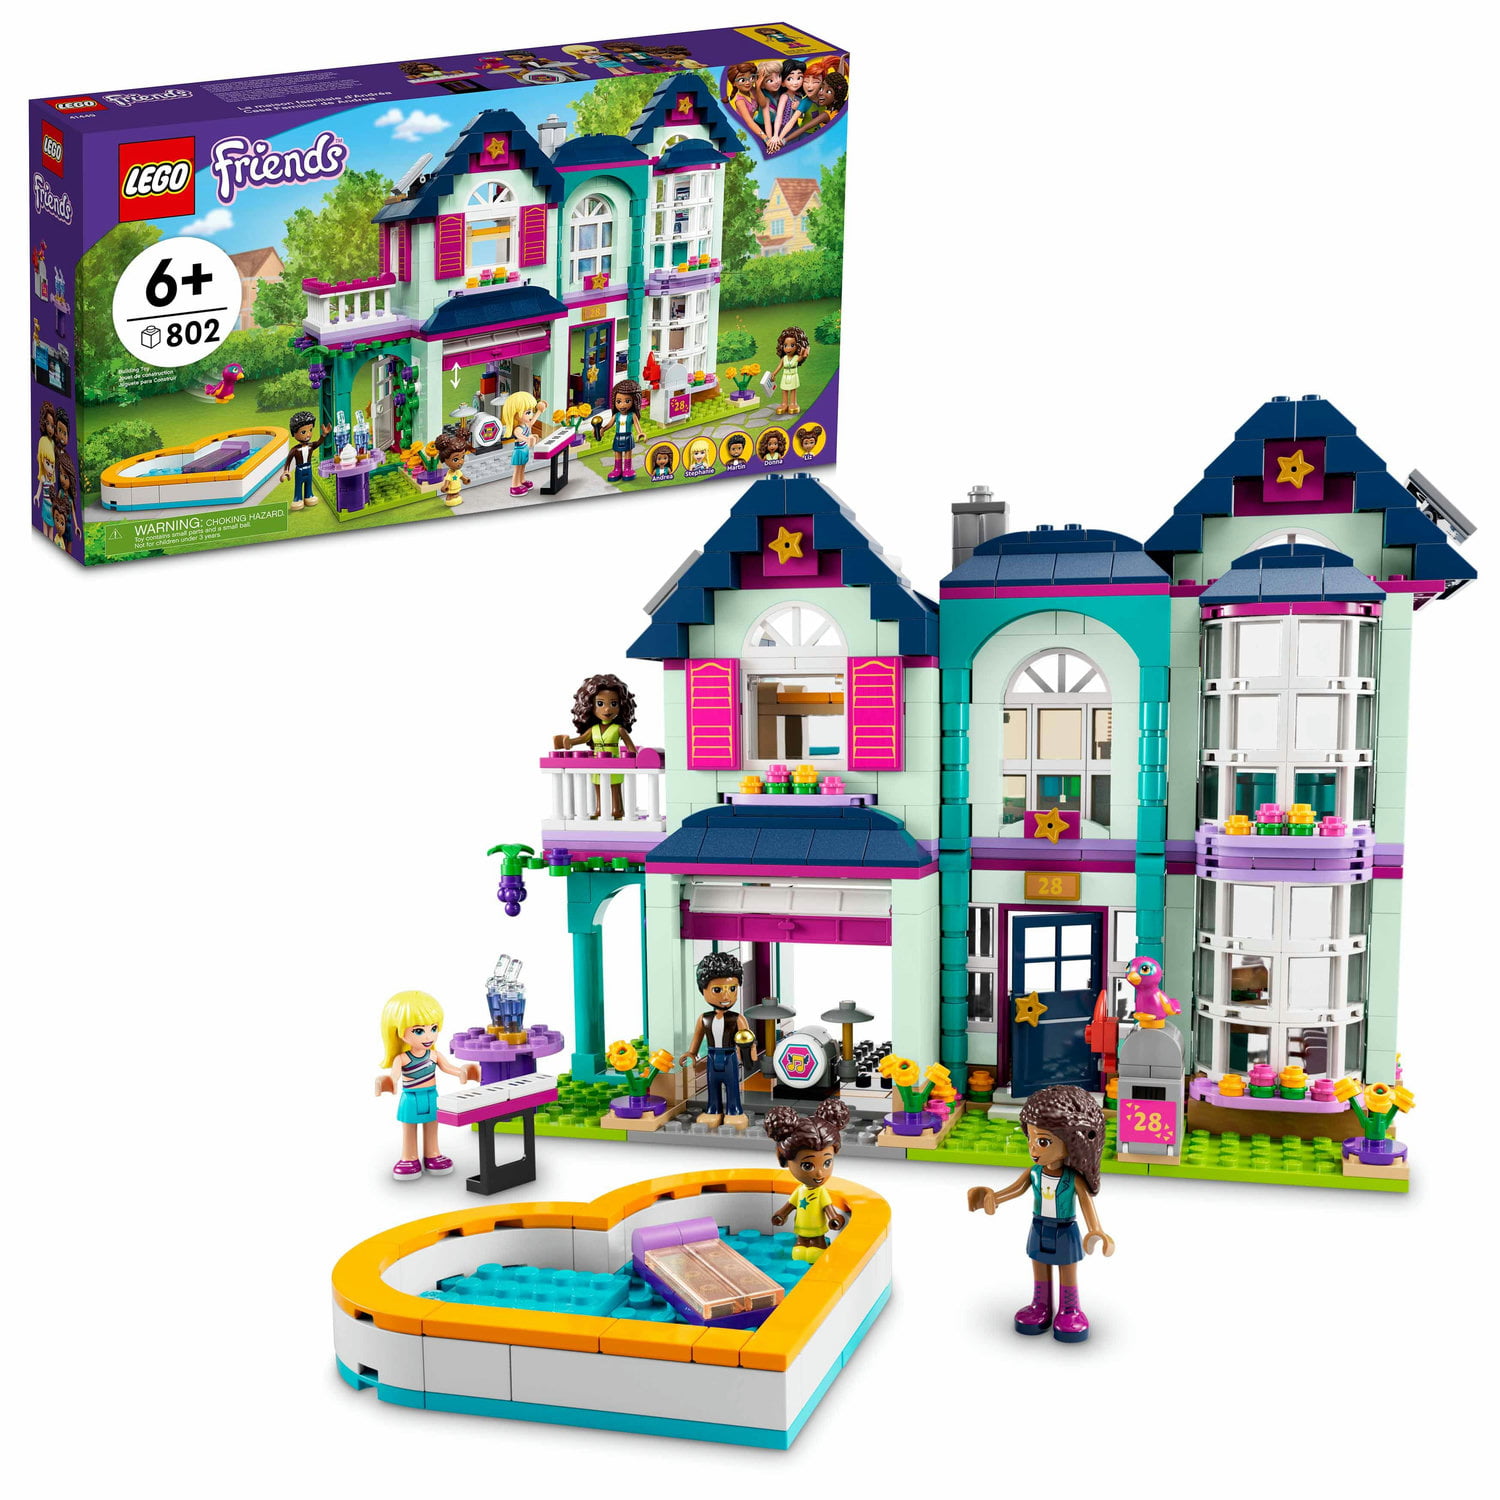 344Pcs Creative Garden House Street View Building Blocks for Kids and Adults Compatible with Lego WWEI Modular House Buildings Set 